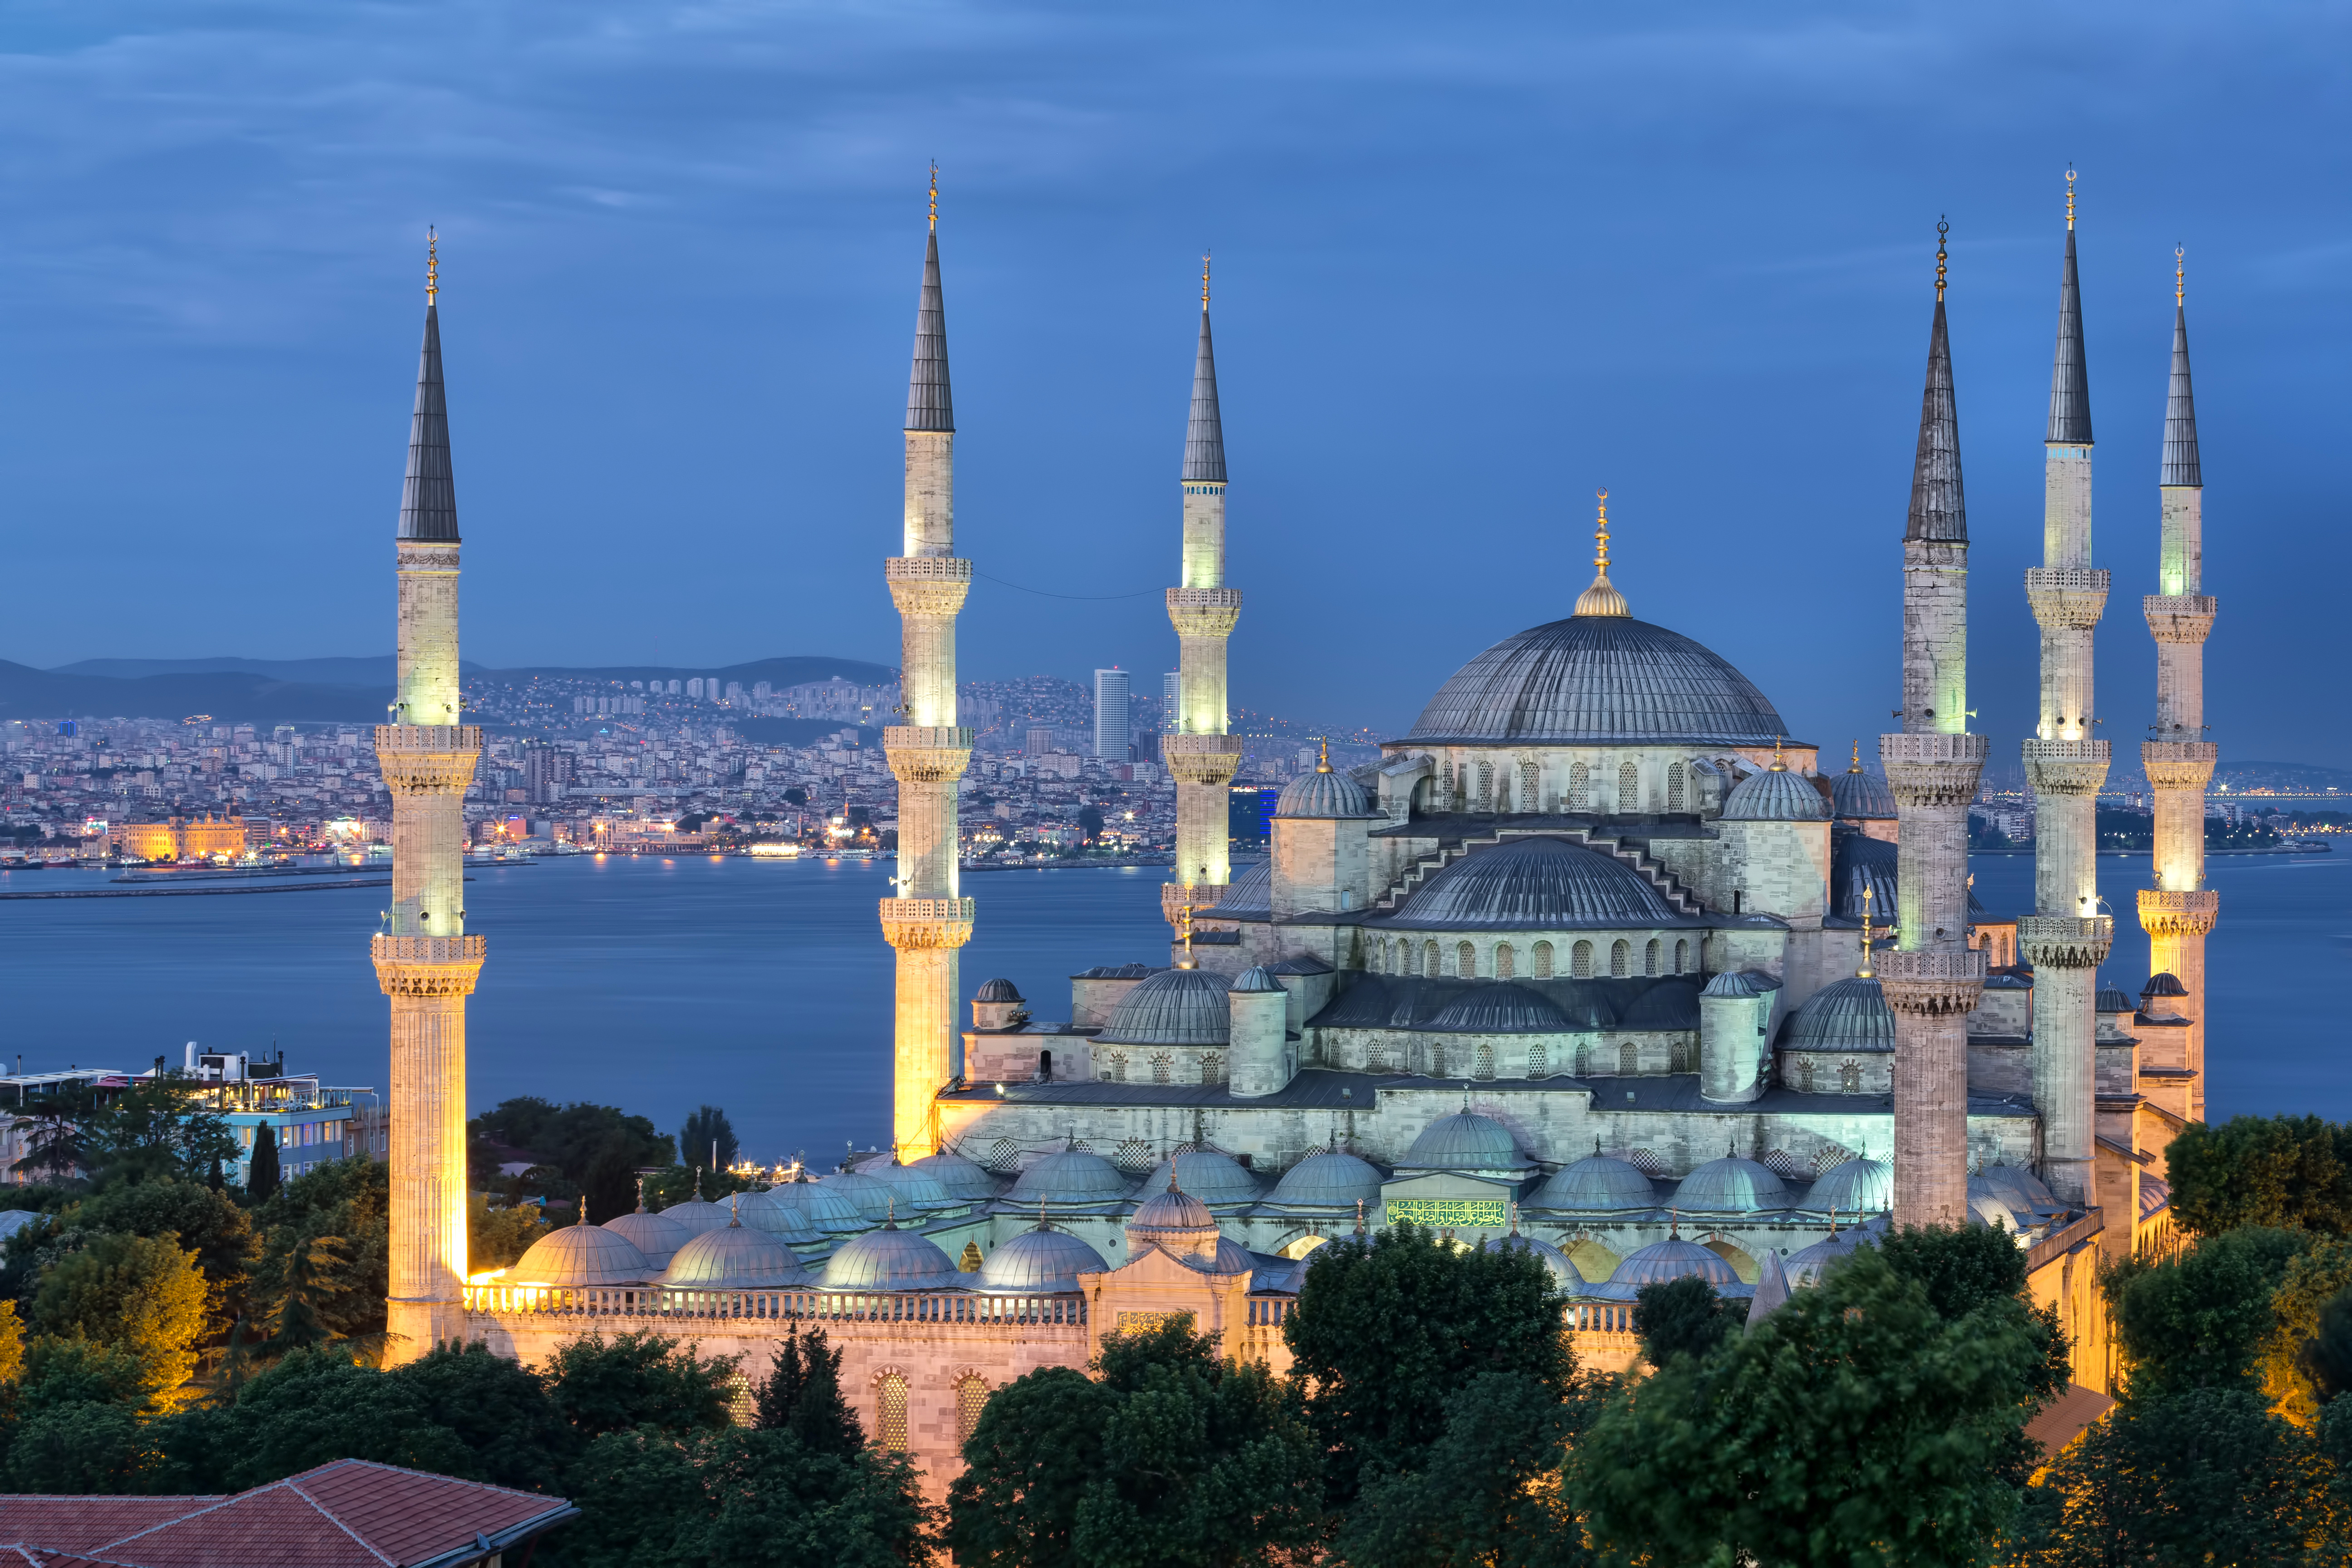 Turkey, Sultanahmet Mosque, The City, Evening, Istanbul, - Sultan Ahmed Mosque - HD Wallpaper 